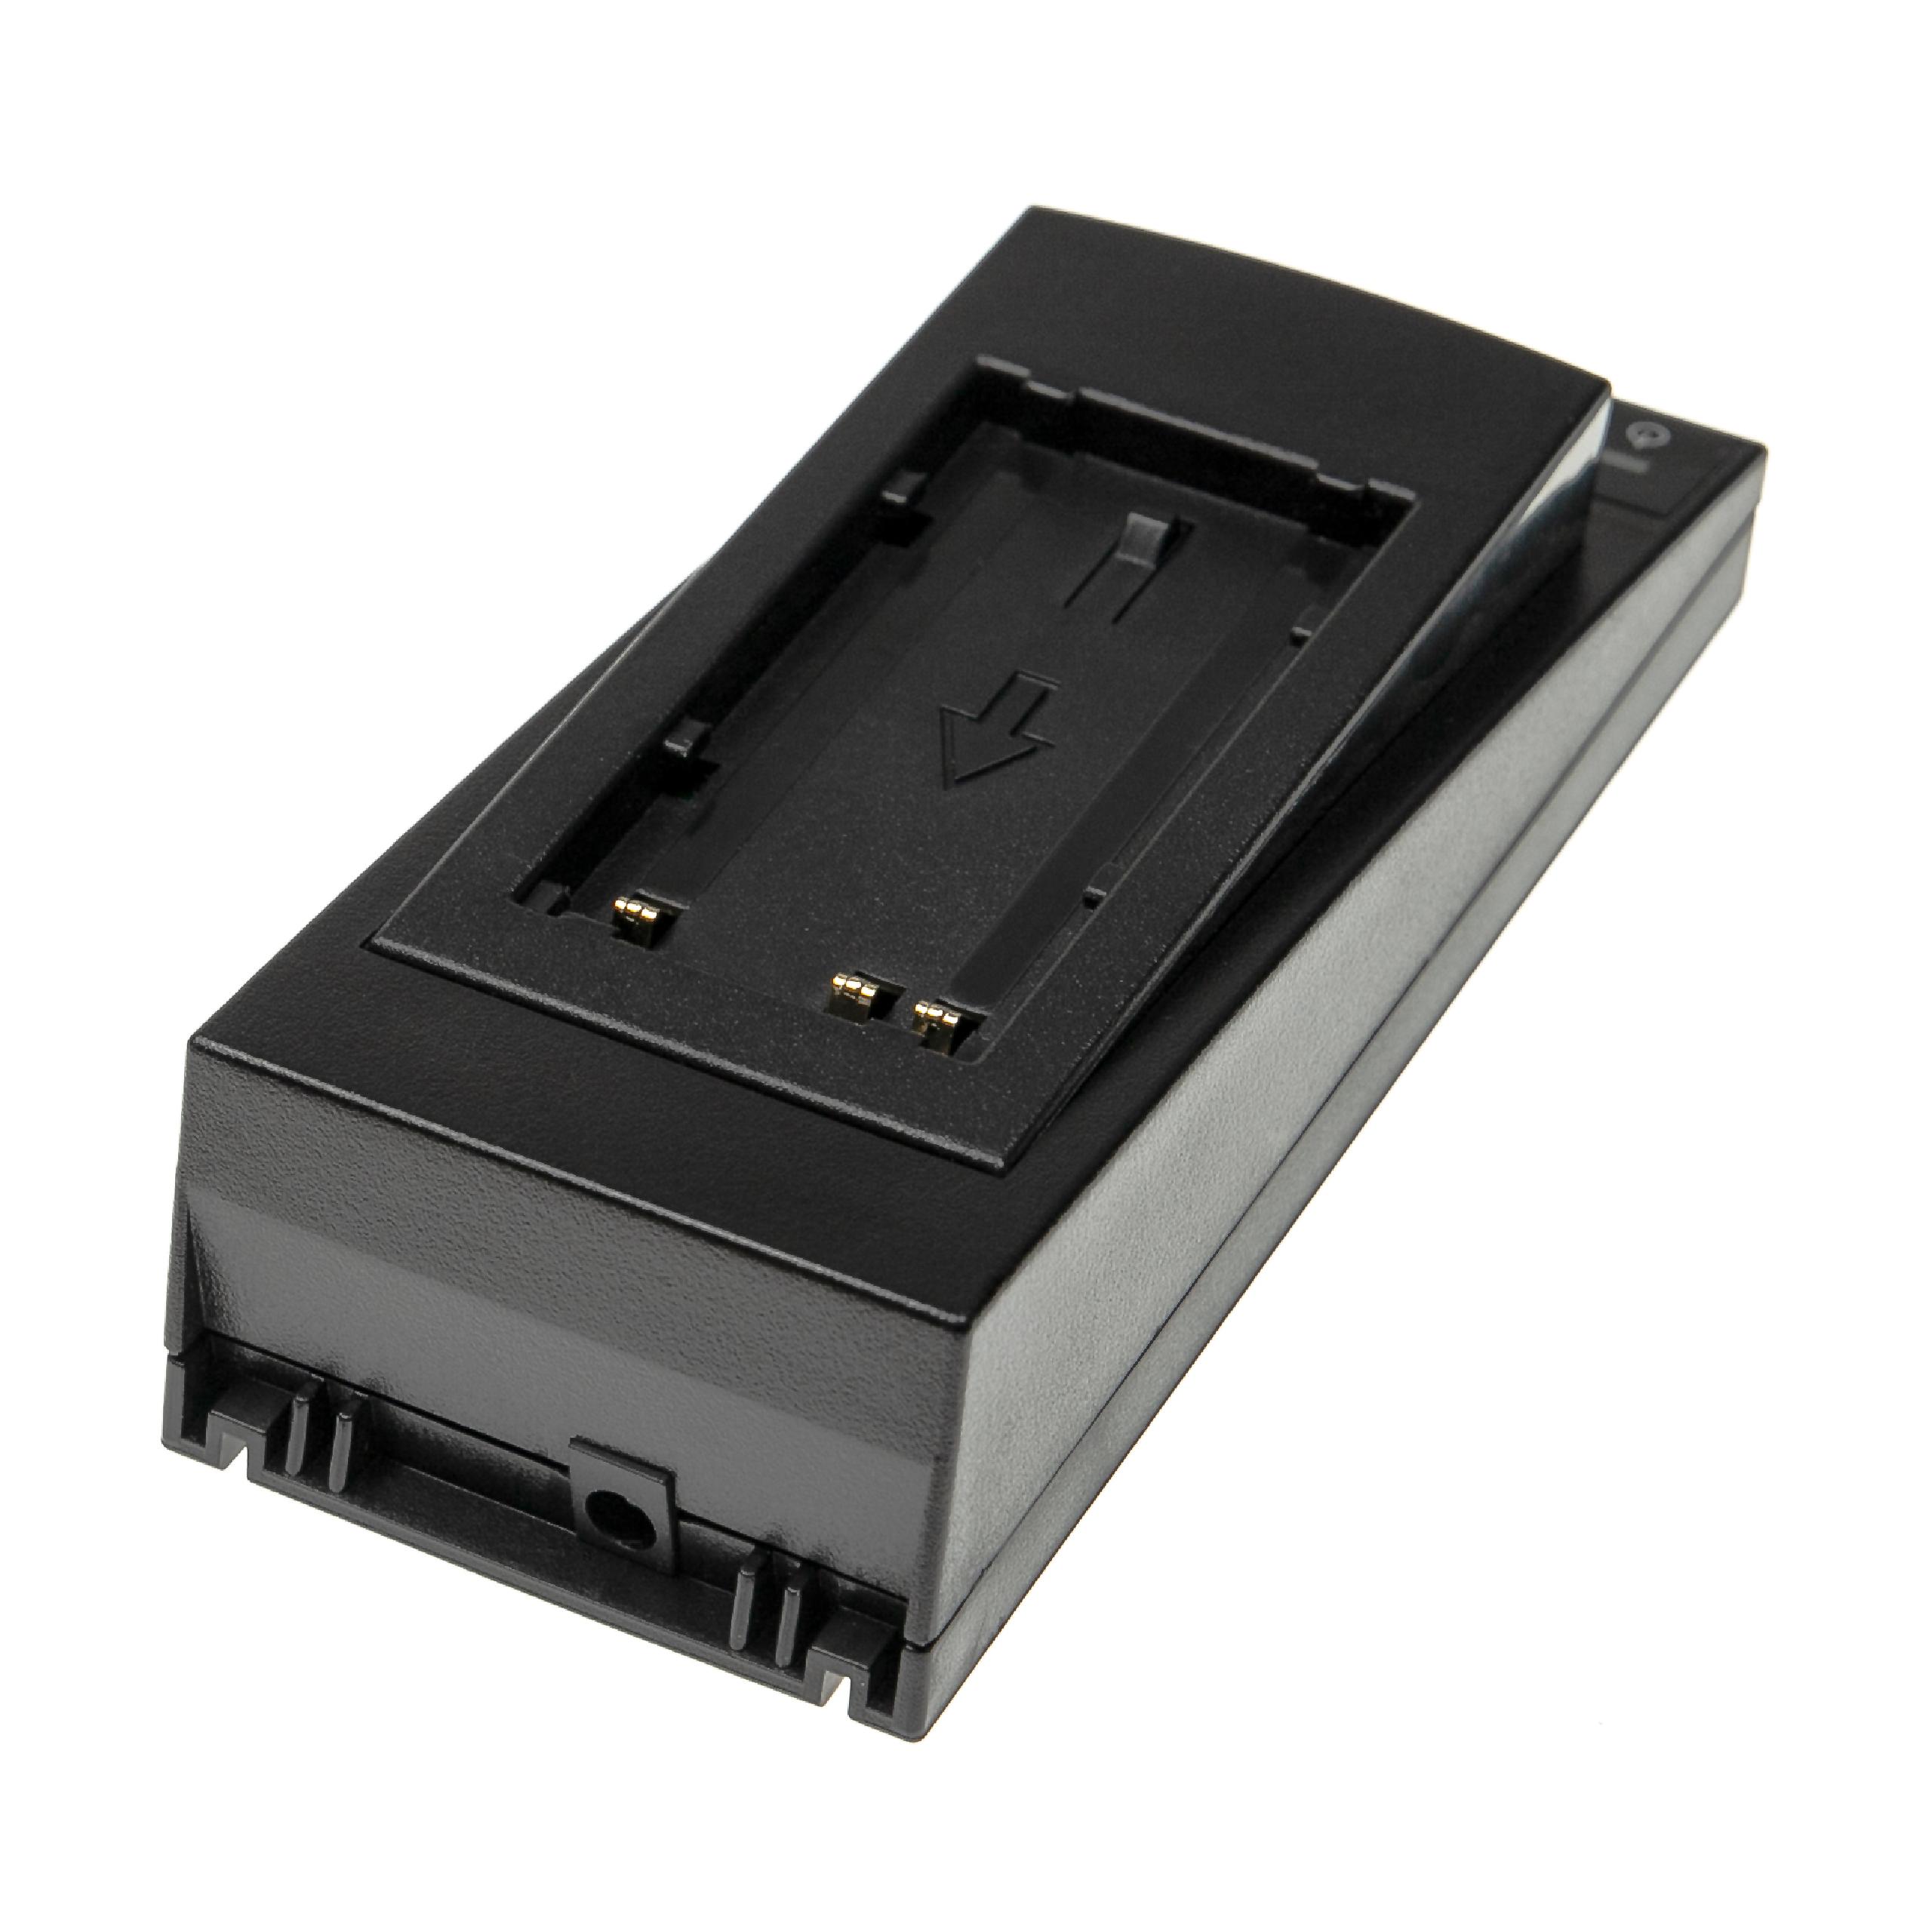 Charger Suitable for Measuring Tool / Battery etc. - Charge Dock + In-Car Cable, 7.5 V /